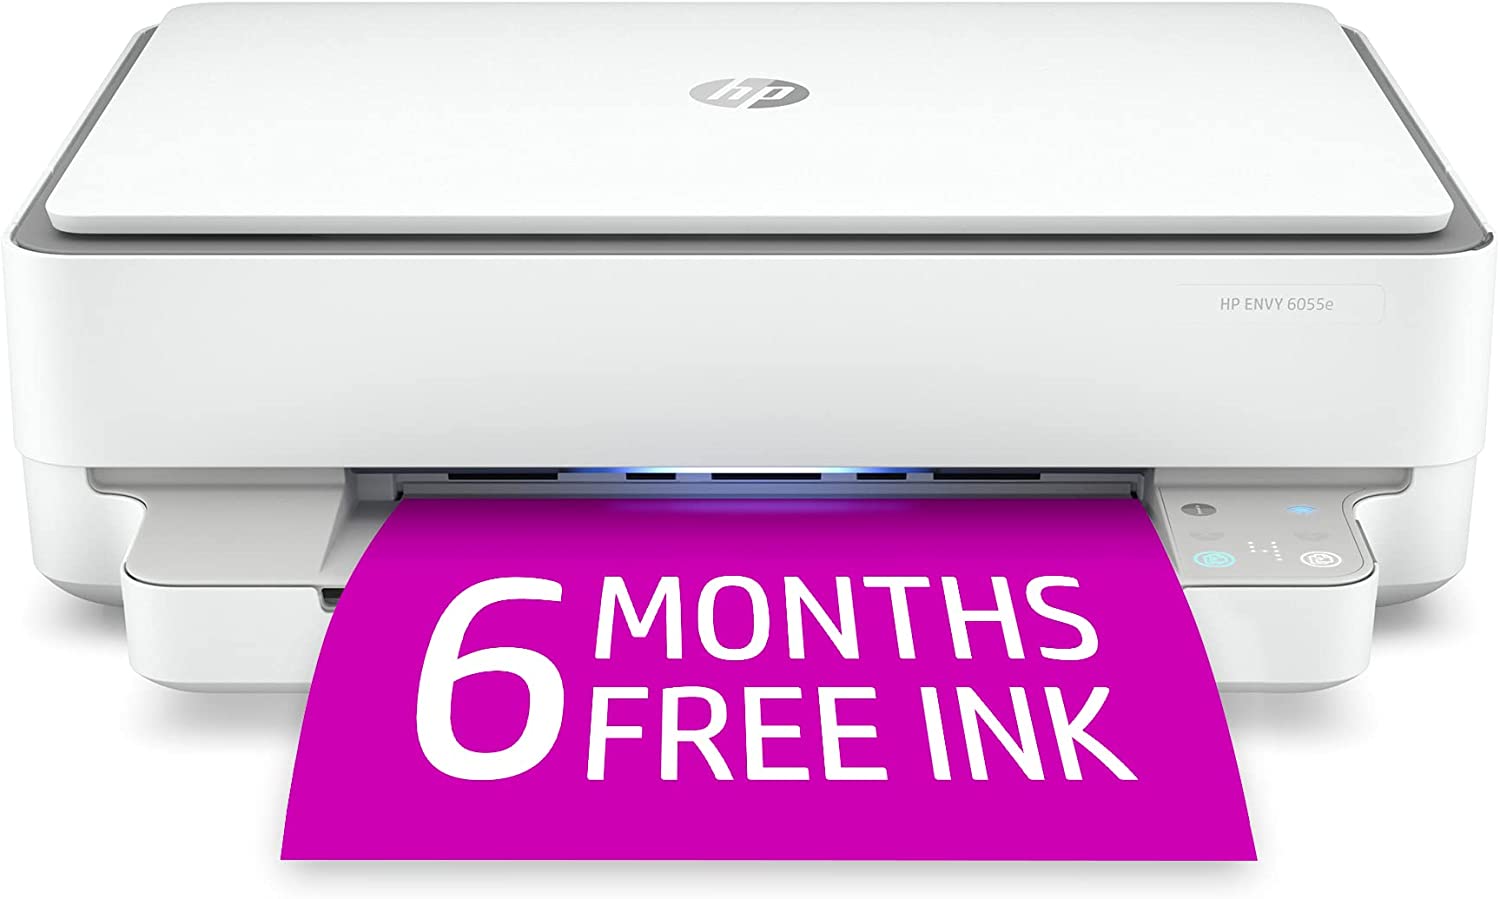 HP ENVY 6055e All-in-One Wireless Color Printer, with [...]